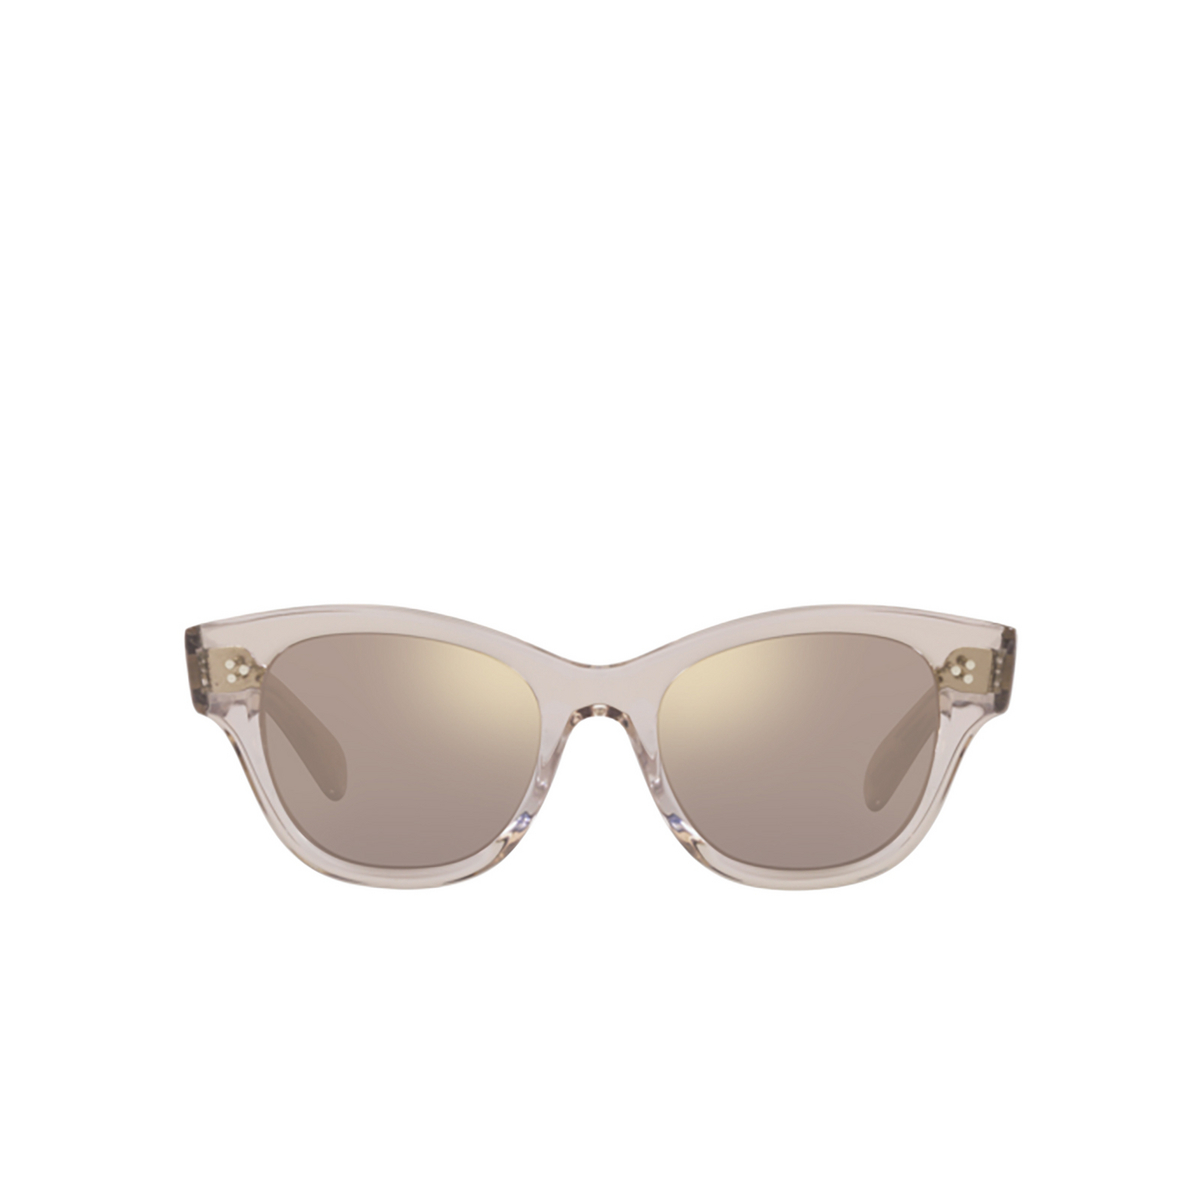 Oliver Peoples EADIE Sunglasses 14675D Dune - front view